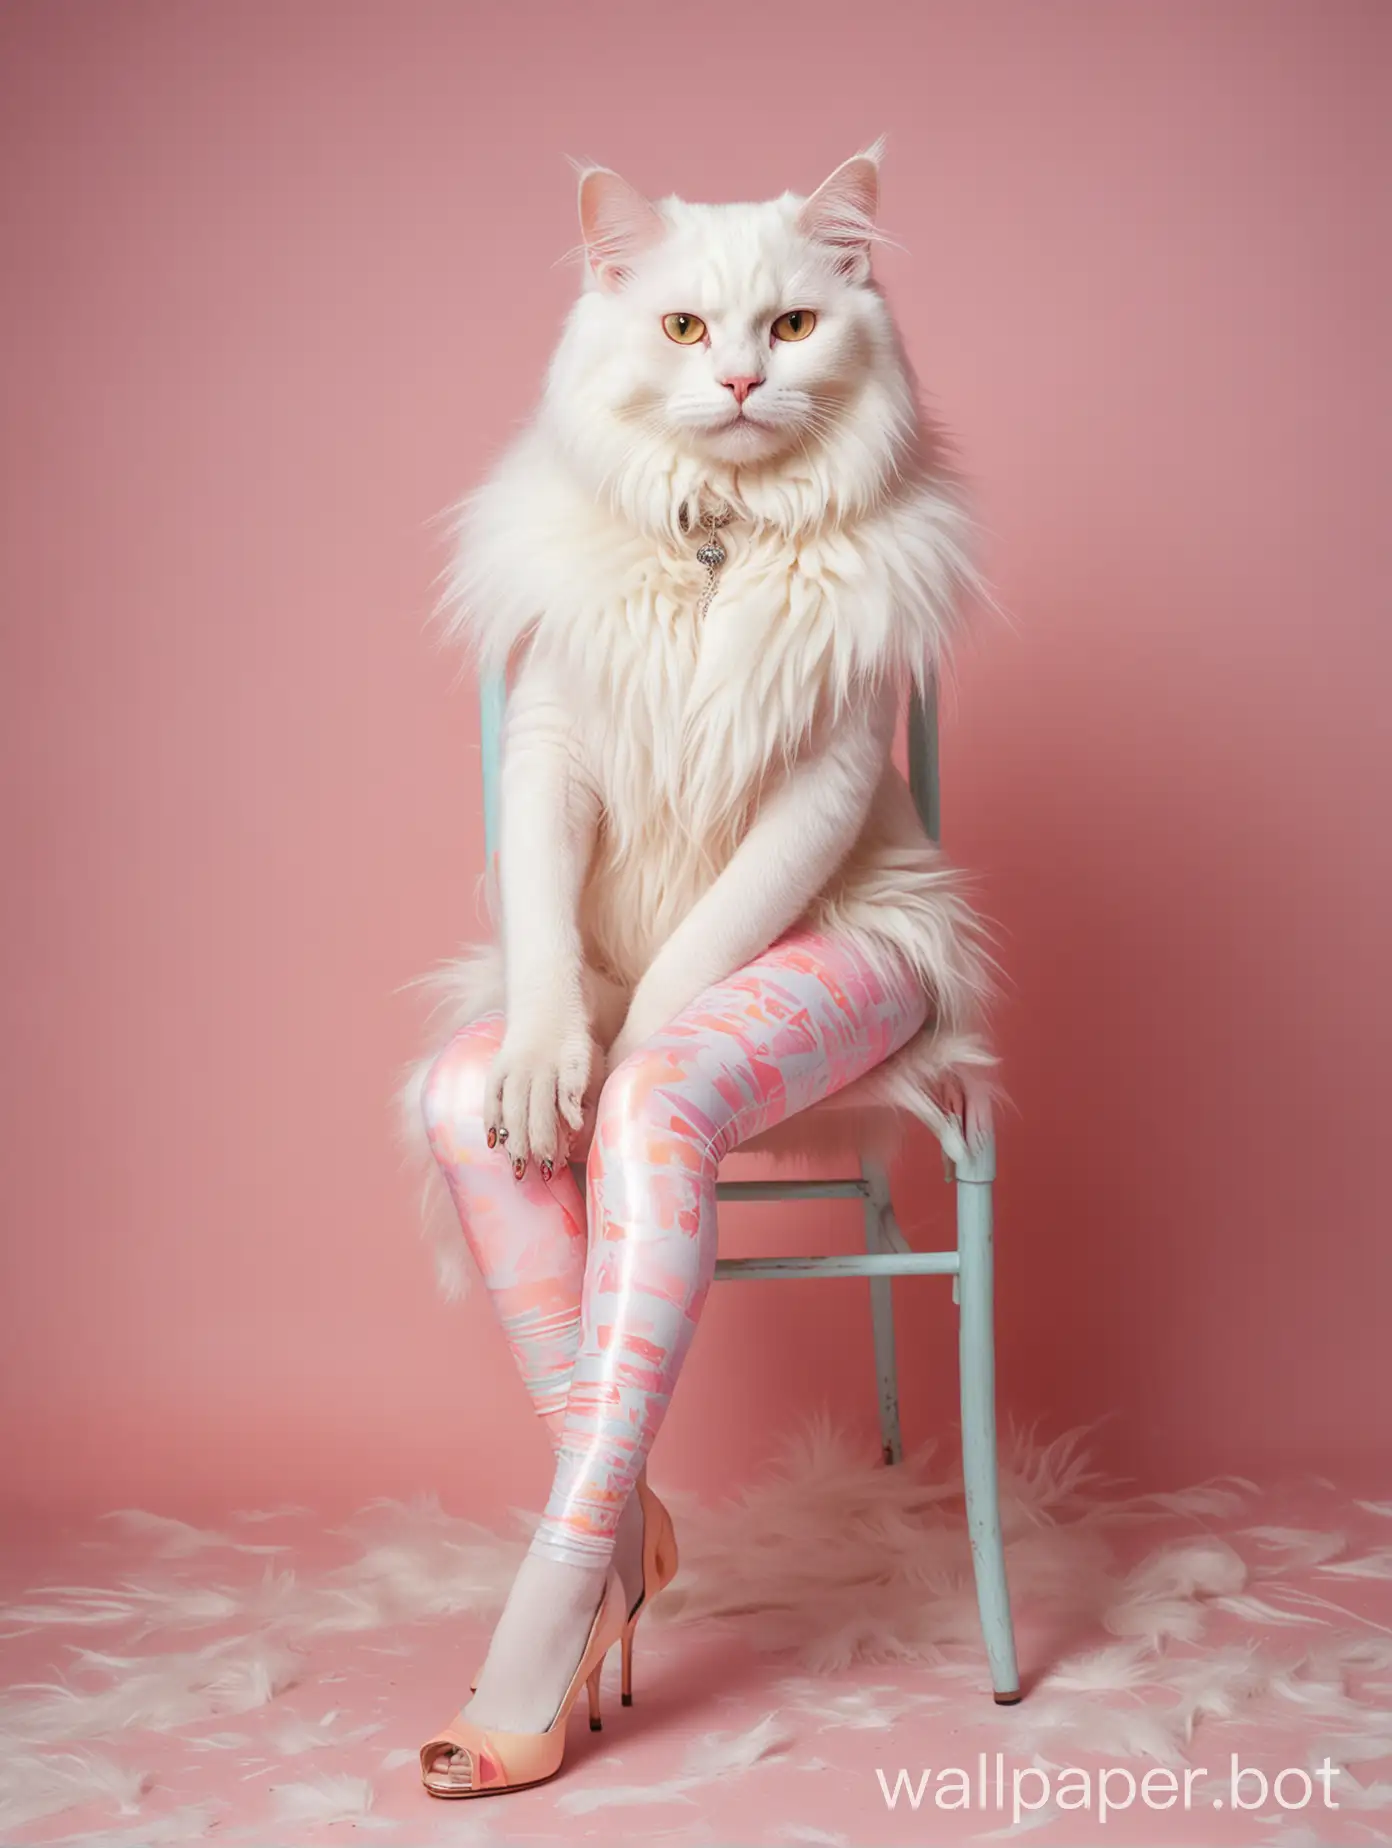 full body photograph of an extremely beautiful and glamorous albino cat with long white fur, wearing pastel colored shiny leggings in the style of colorful neon drawings, sitting on a chair in front of a painted background, wearing high heels shoes, soft studio lighting, dreamlike atmosphere, fashion photography, cinematic